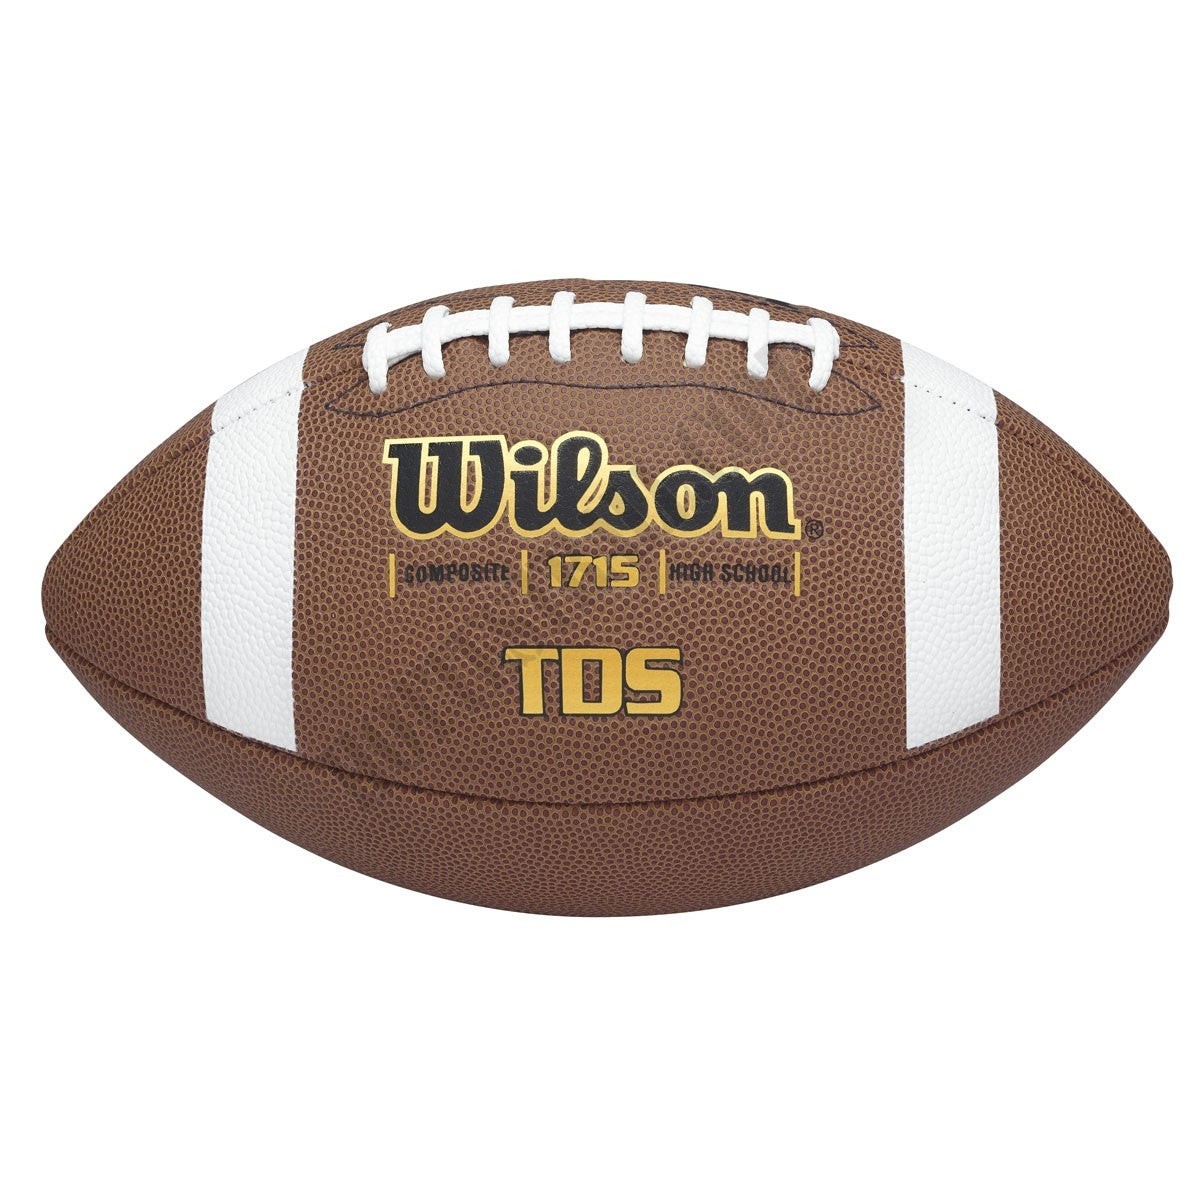 TDS Composite Football - Official Size - Wilson Discount Store - -0